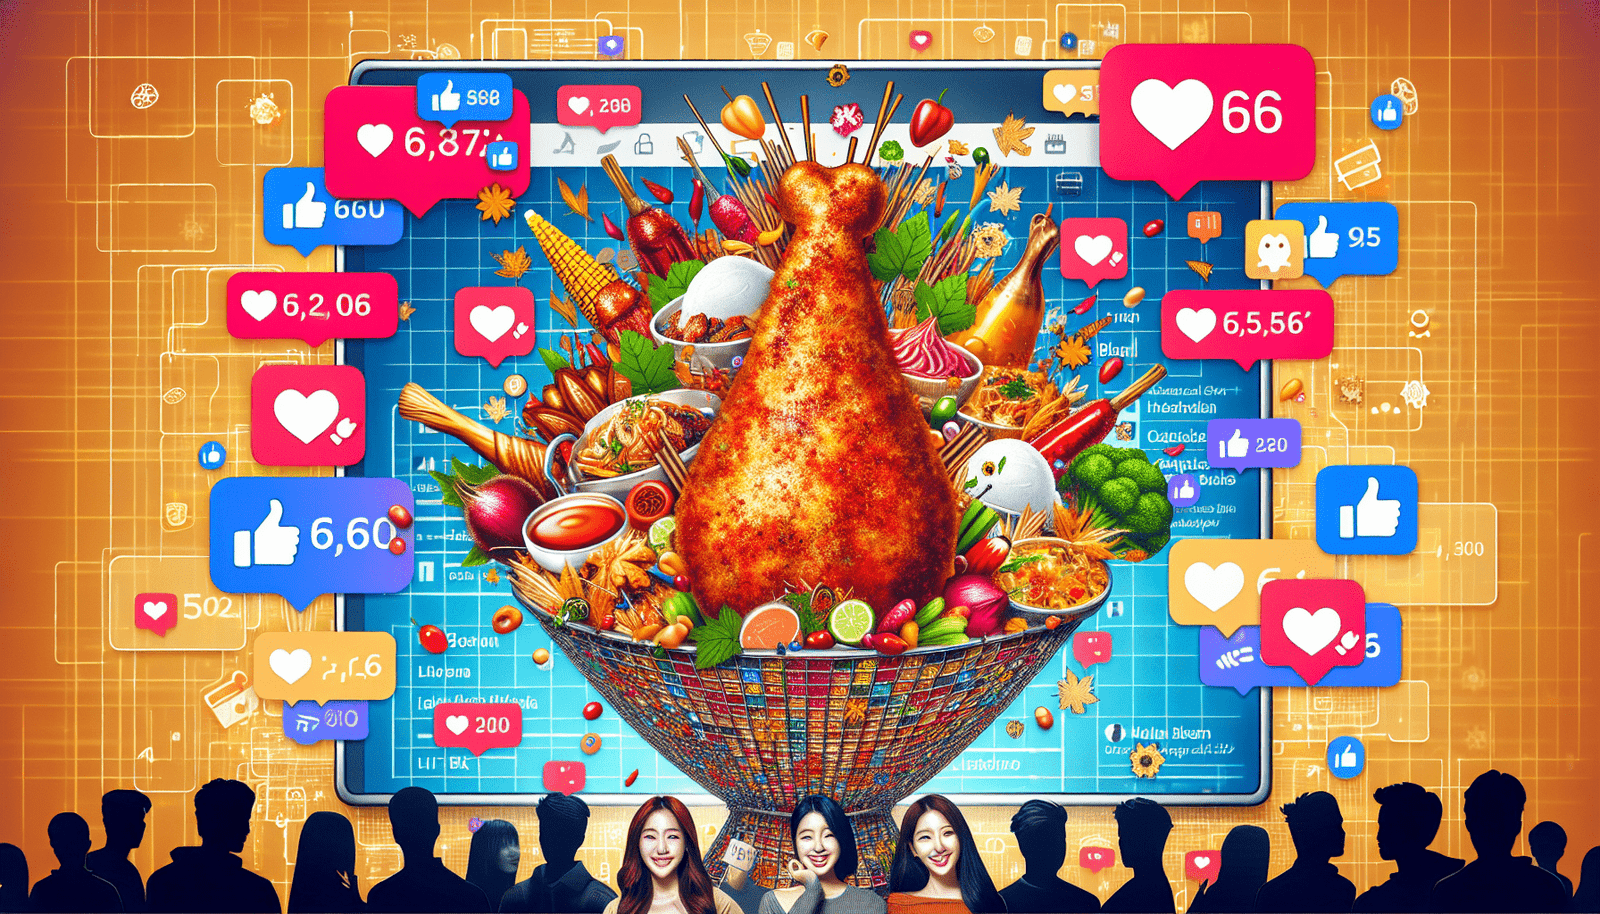 Can You Share Insights Into The Rise Of Viral Korean Food Trends On Social Media?